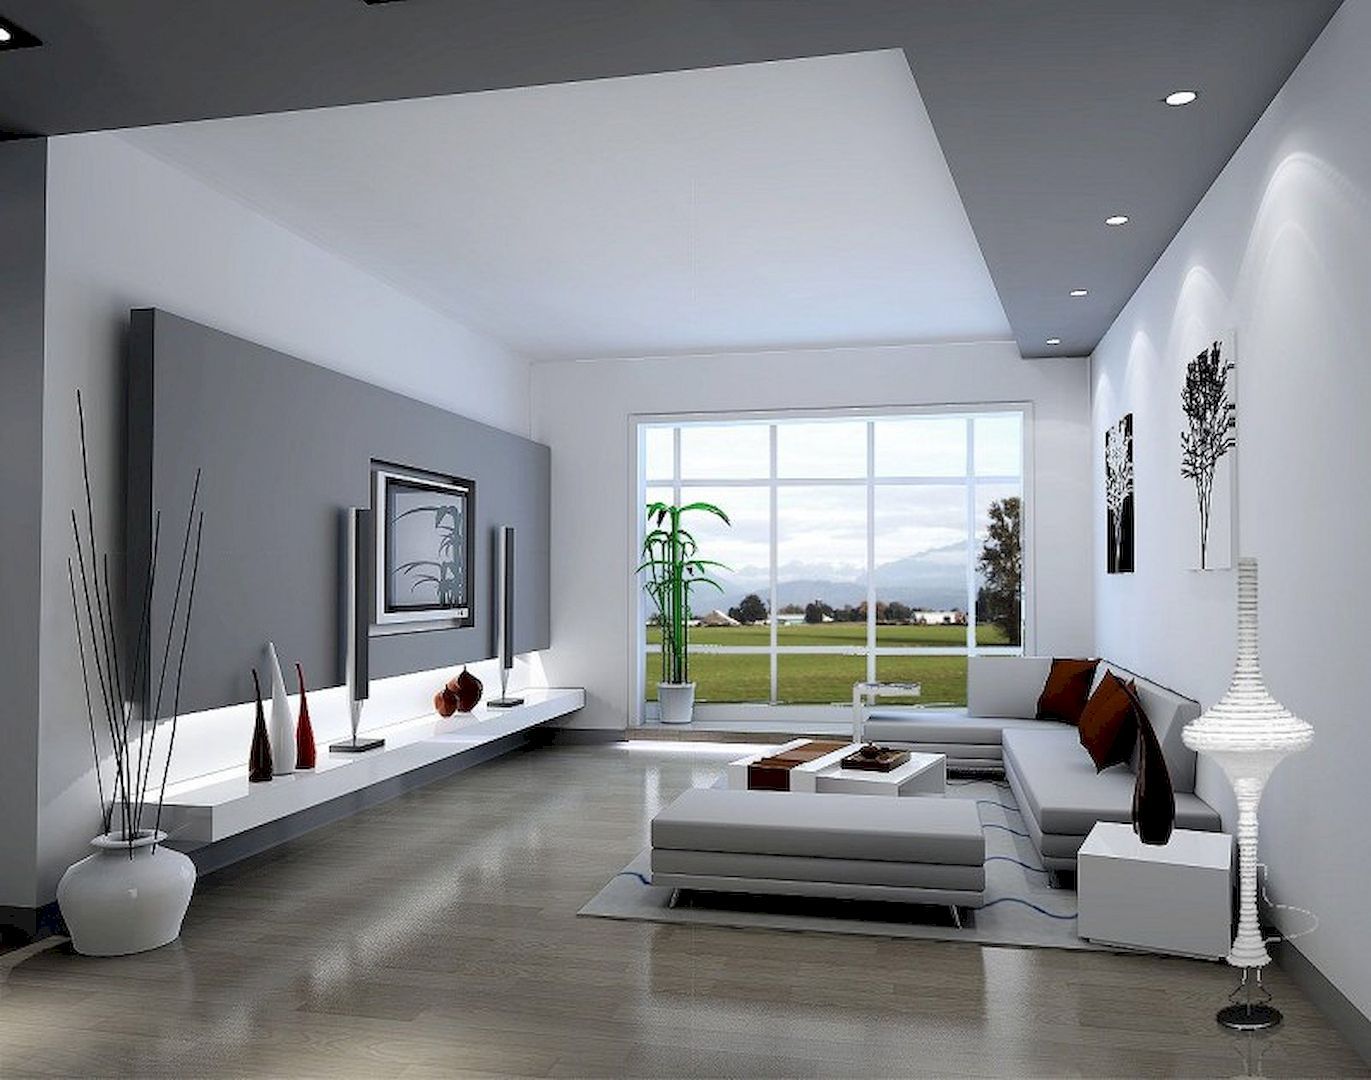 7 Best Living Room Interior Design Ideas You Should Try